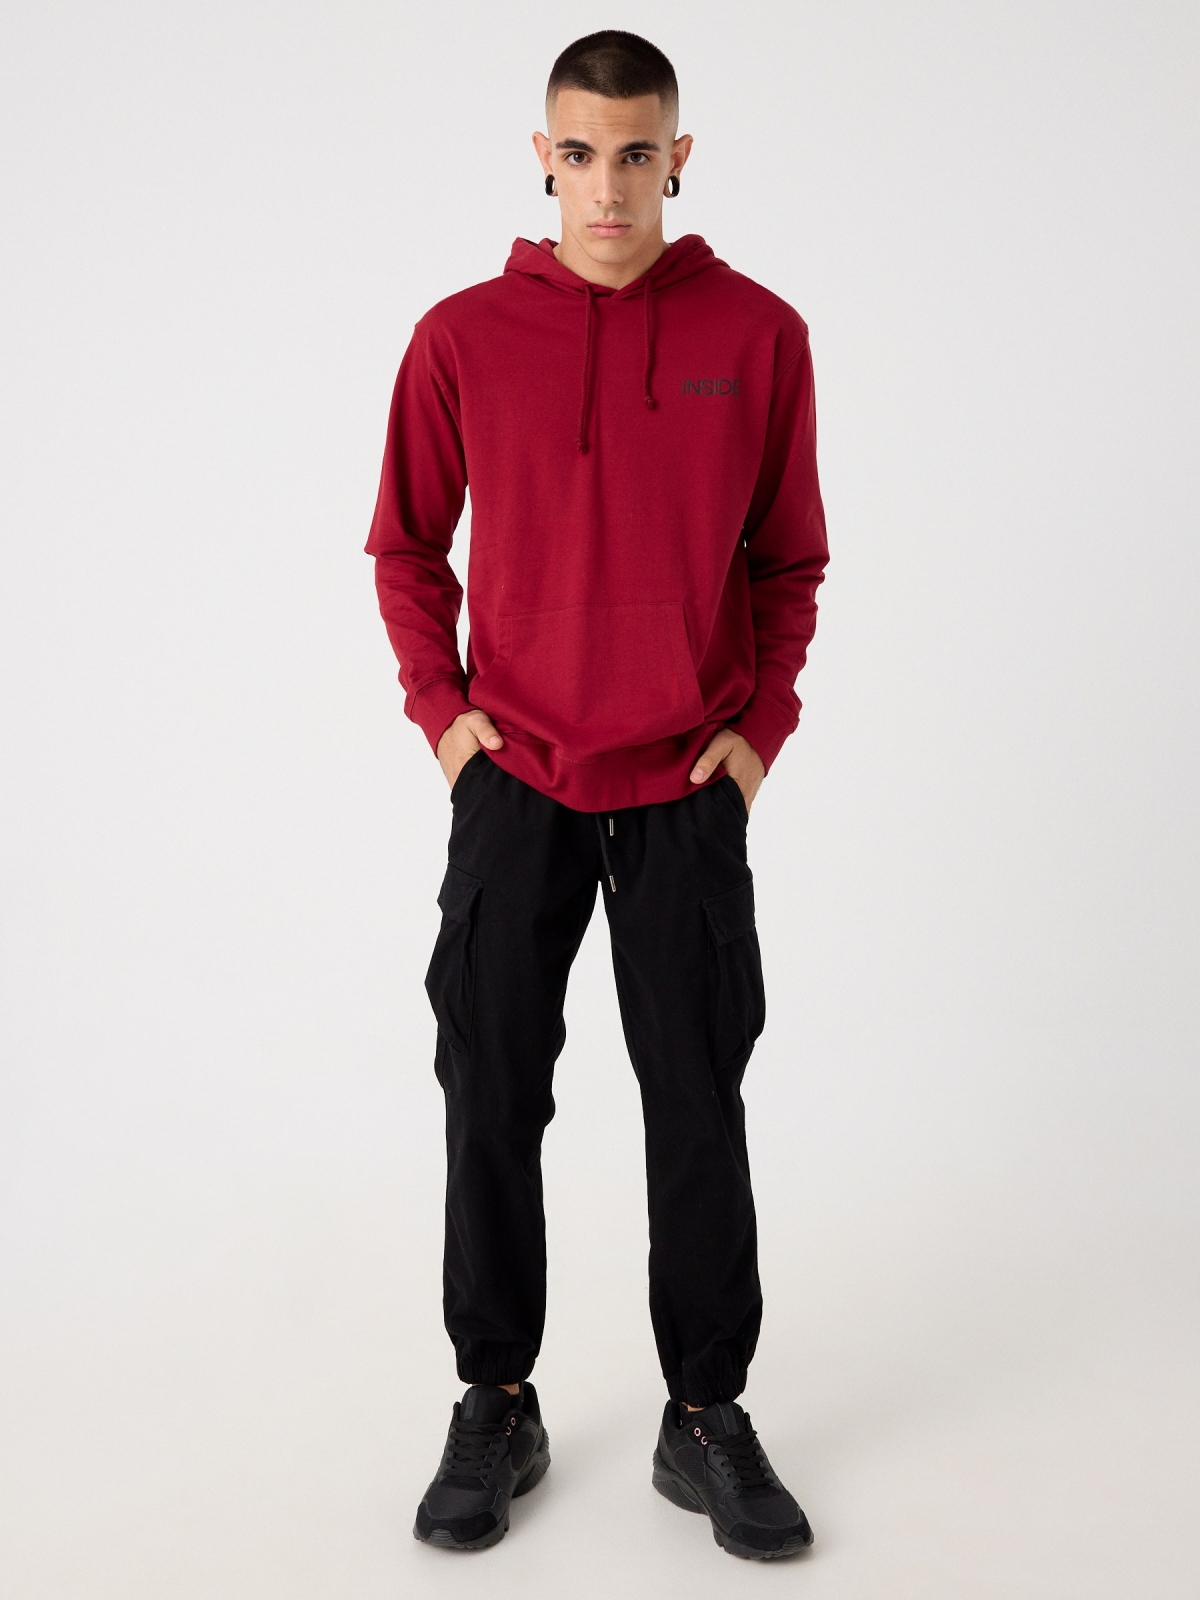 Hooded sweatshirt with logo red front view